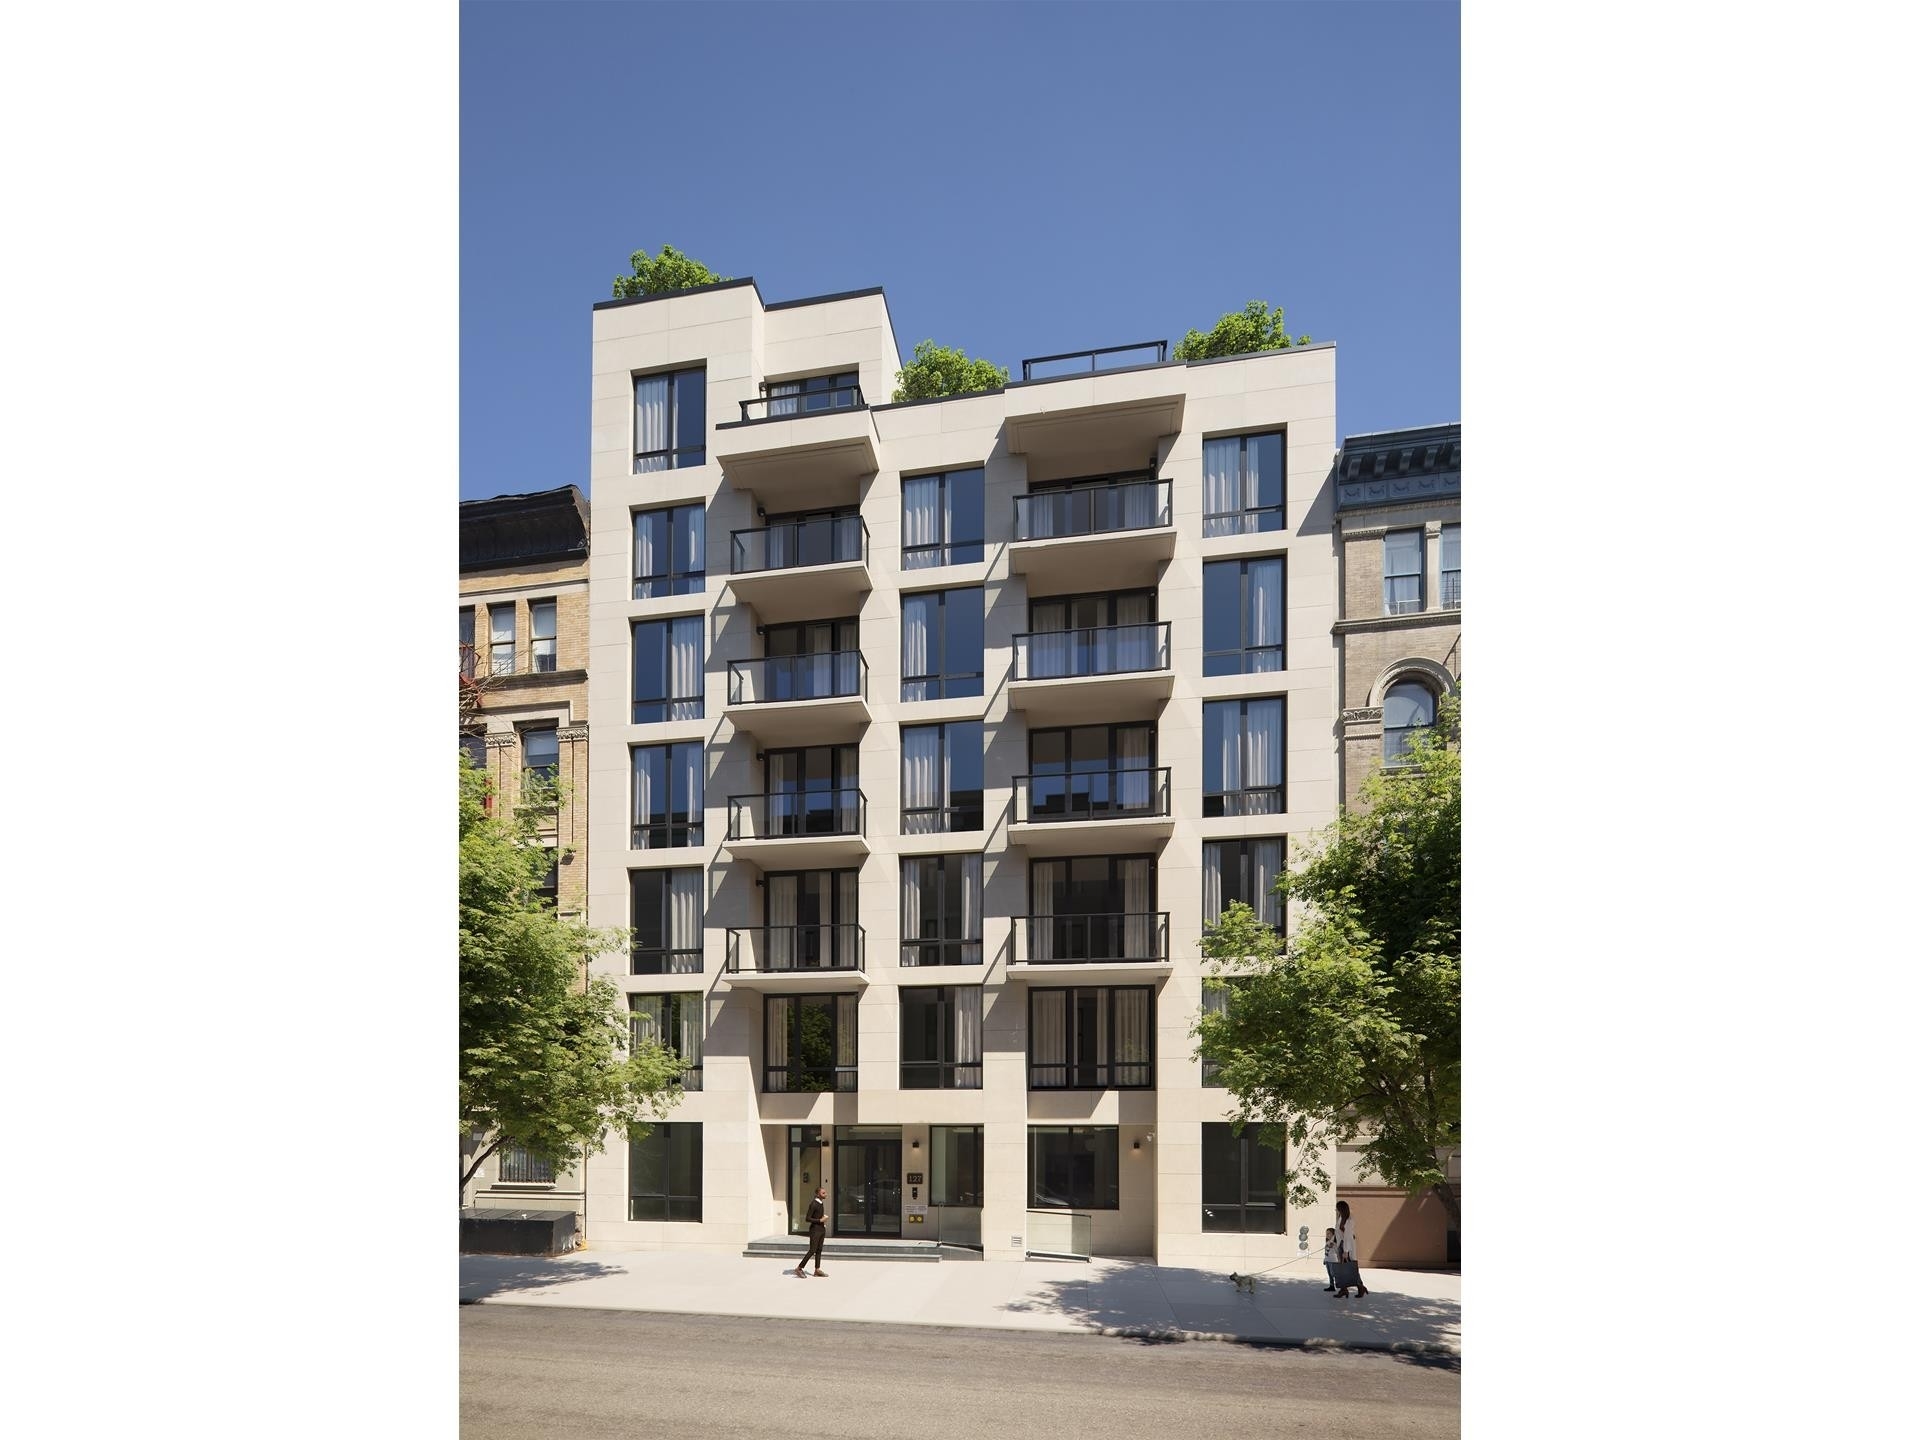 17. Condominiums for Sale at Parc North, 127 W 112TH ST, 6A South Harlem, New York, NY 10026